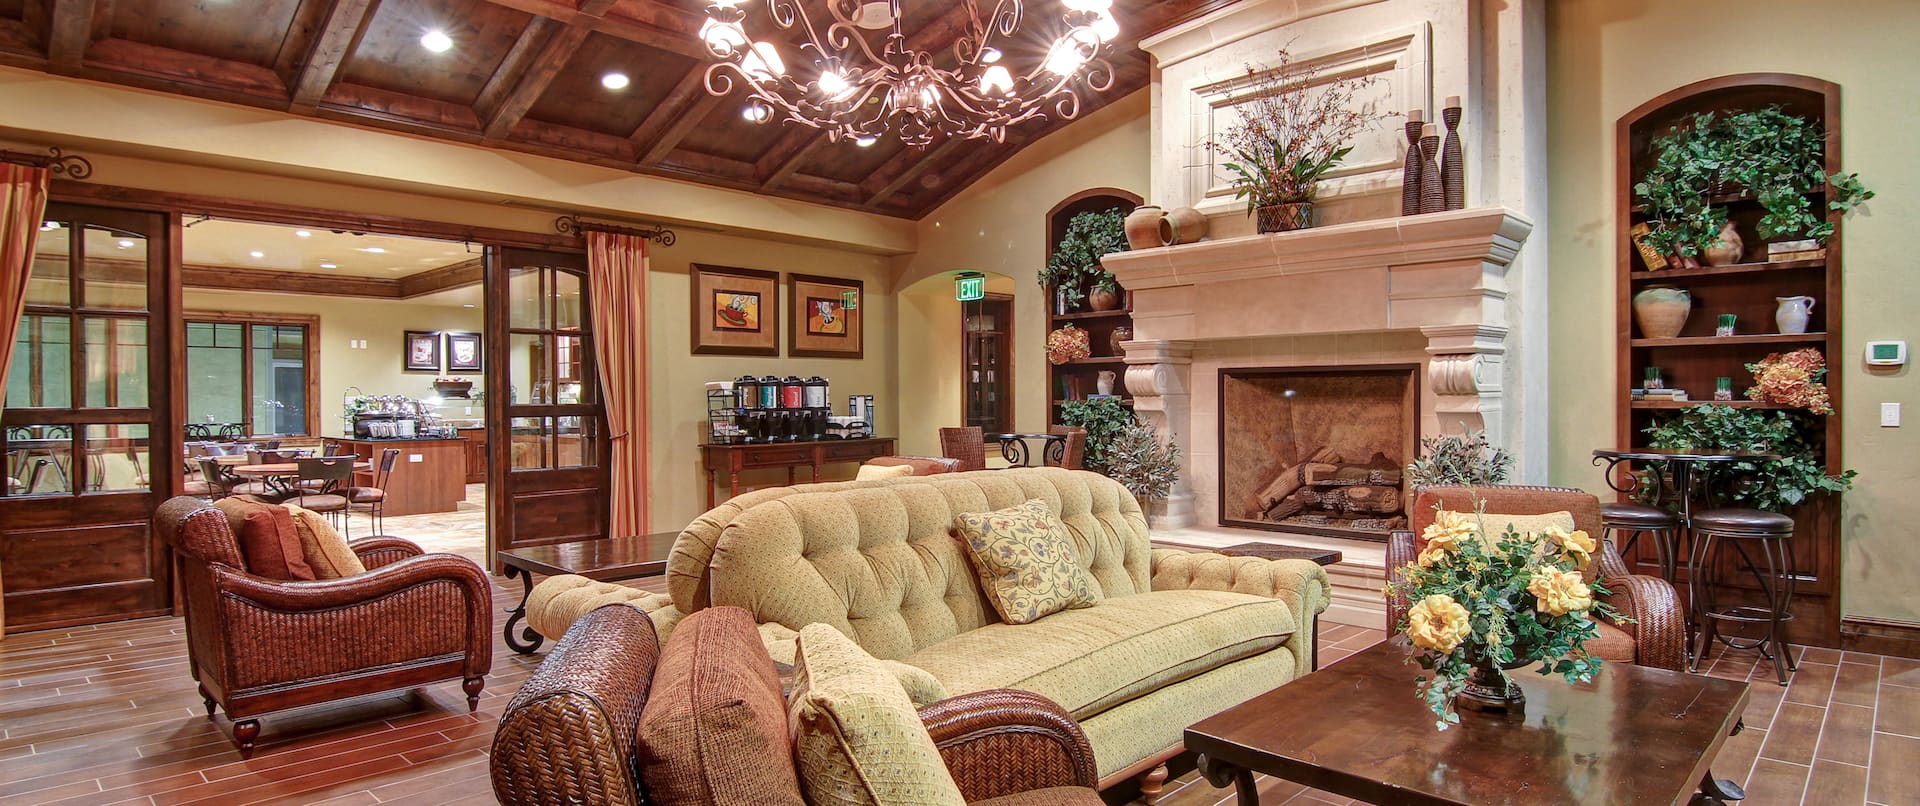 The Great Room lobby with ample seating and fireplace